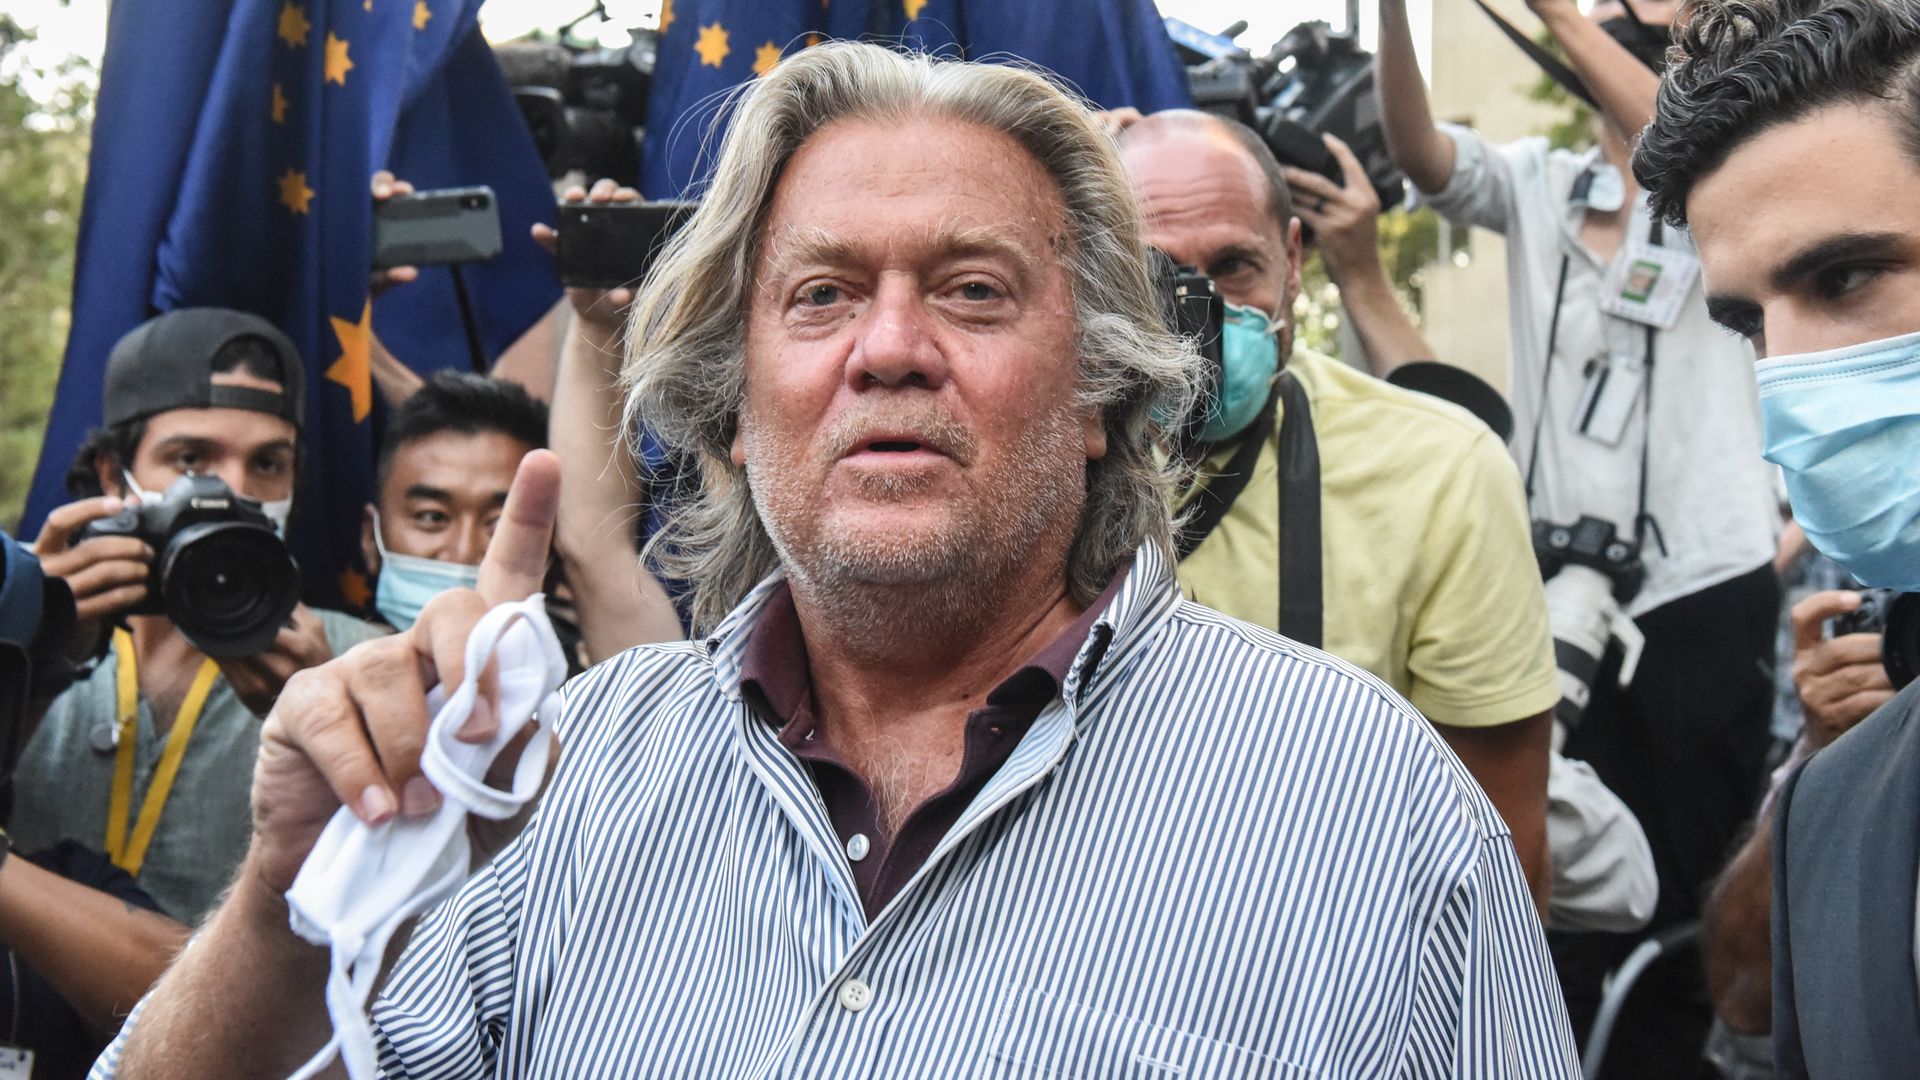 Former White House Chief Strategist Steve Bannon exits the Manhattan Federal Court on August 20, 2020 in the Manhattan borough of New York City.